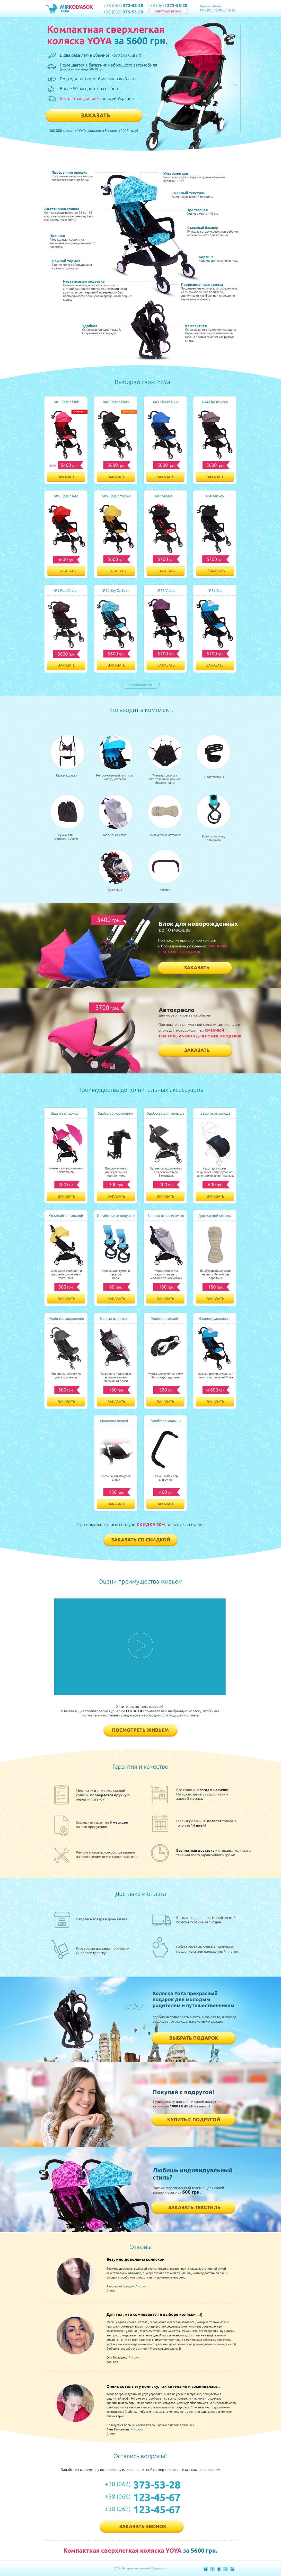 Design and development of Baby Stroller landing page